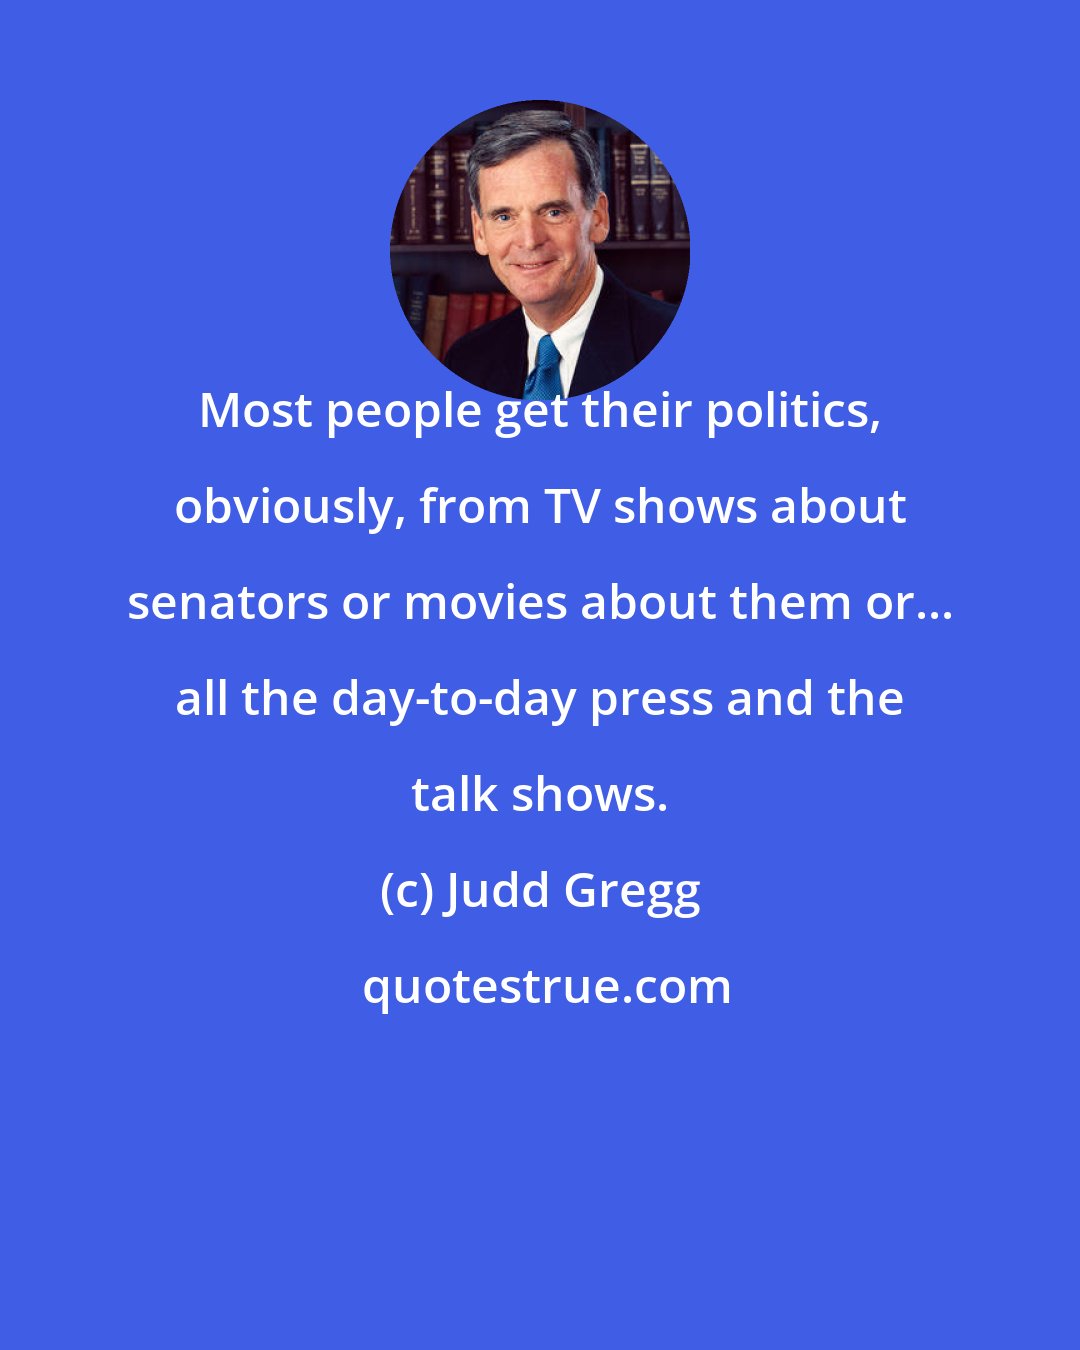 Judd Gregg: Most people get their politics, obviously, from TV shows about senators or movies about them or... all the day-to-day press and the talk shows.